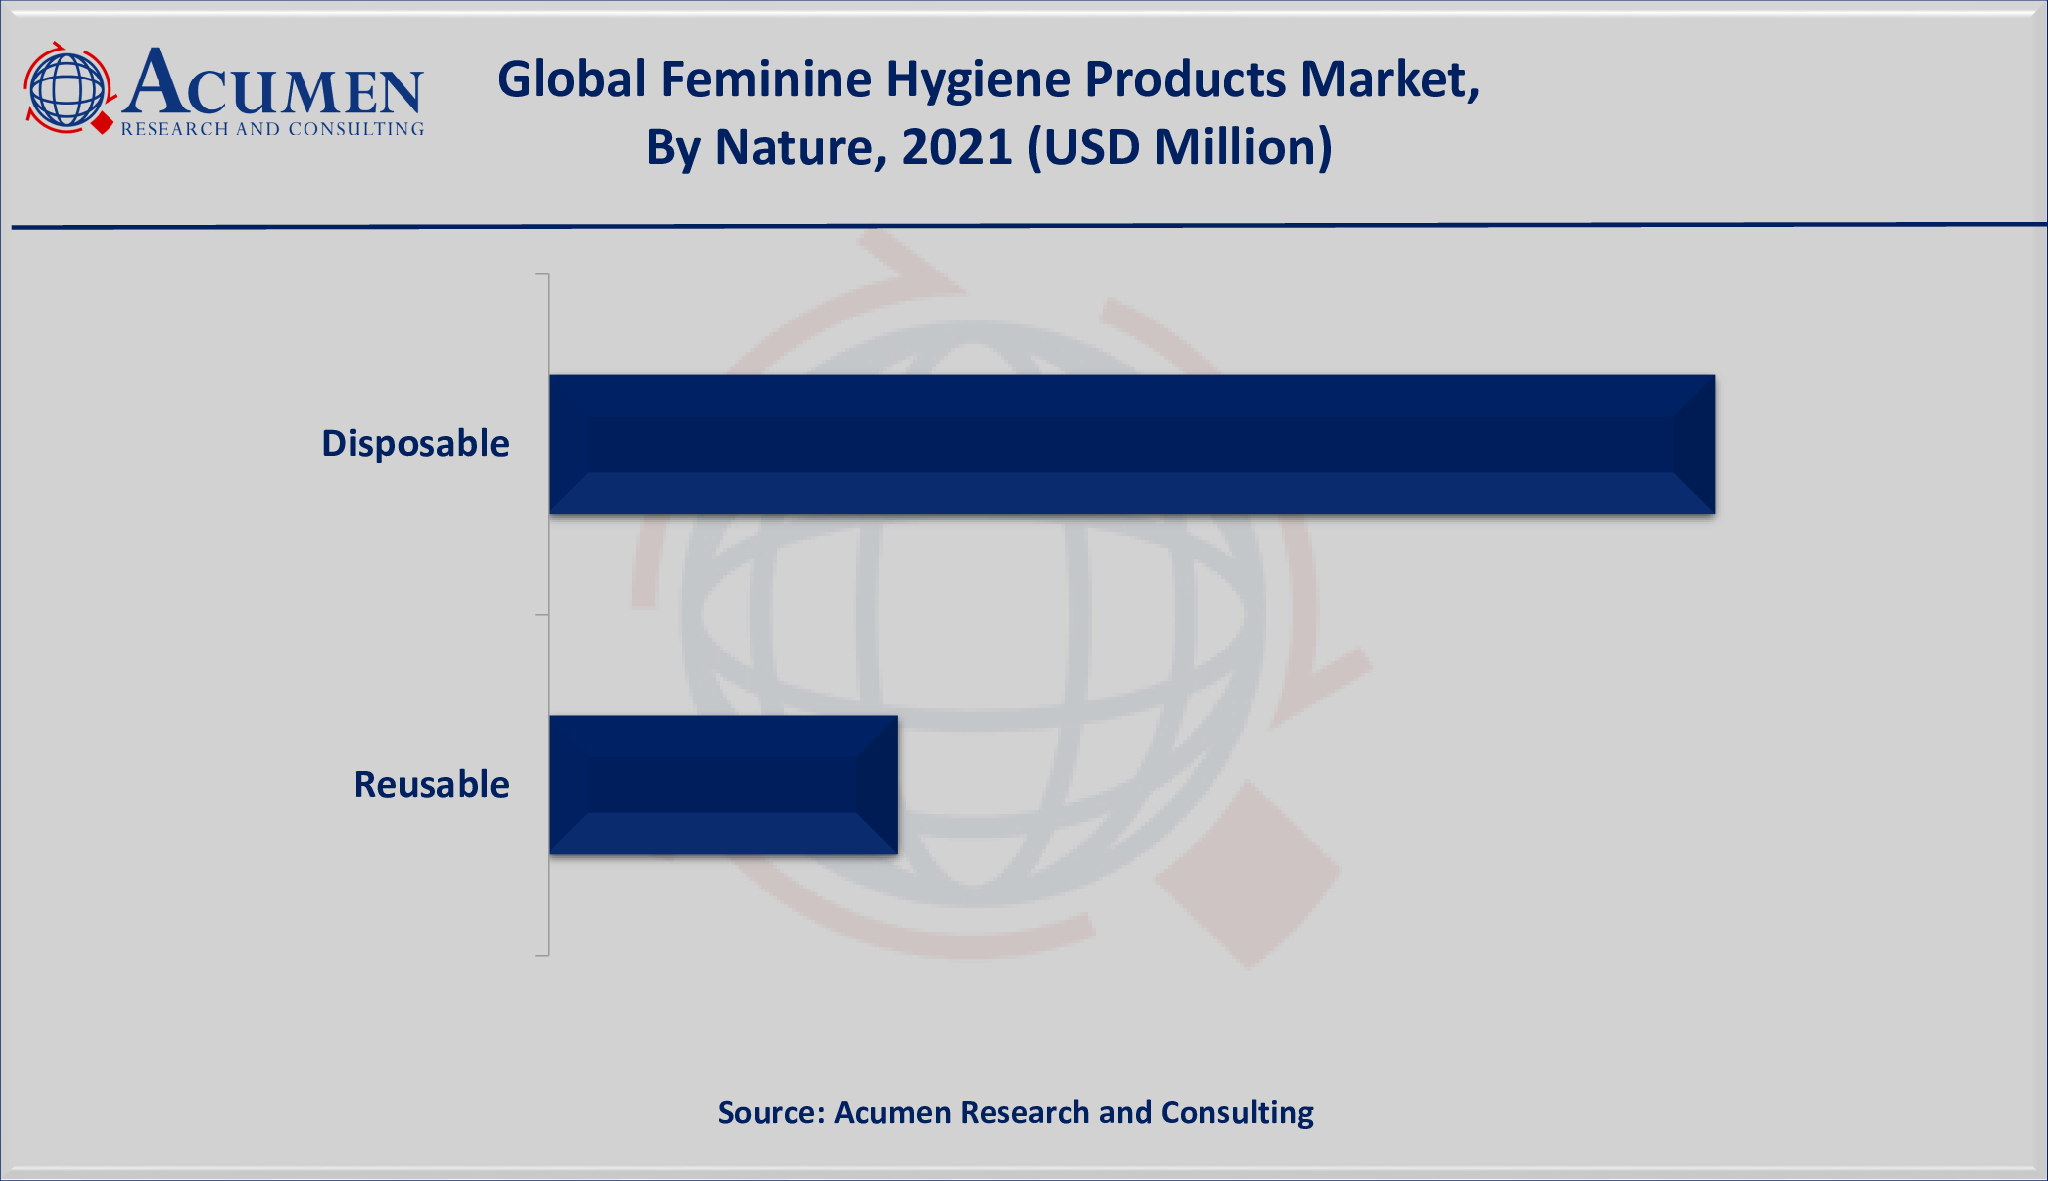 Feminine Hygiene Products Market Share is valued at USD 39,107 Million in 2021 and is projected to reach a market size of USD 69,853 Million by 2030; growing at a CAGR of 6.8%.